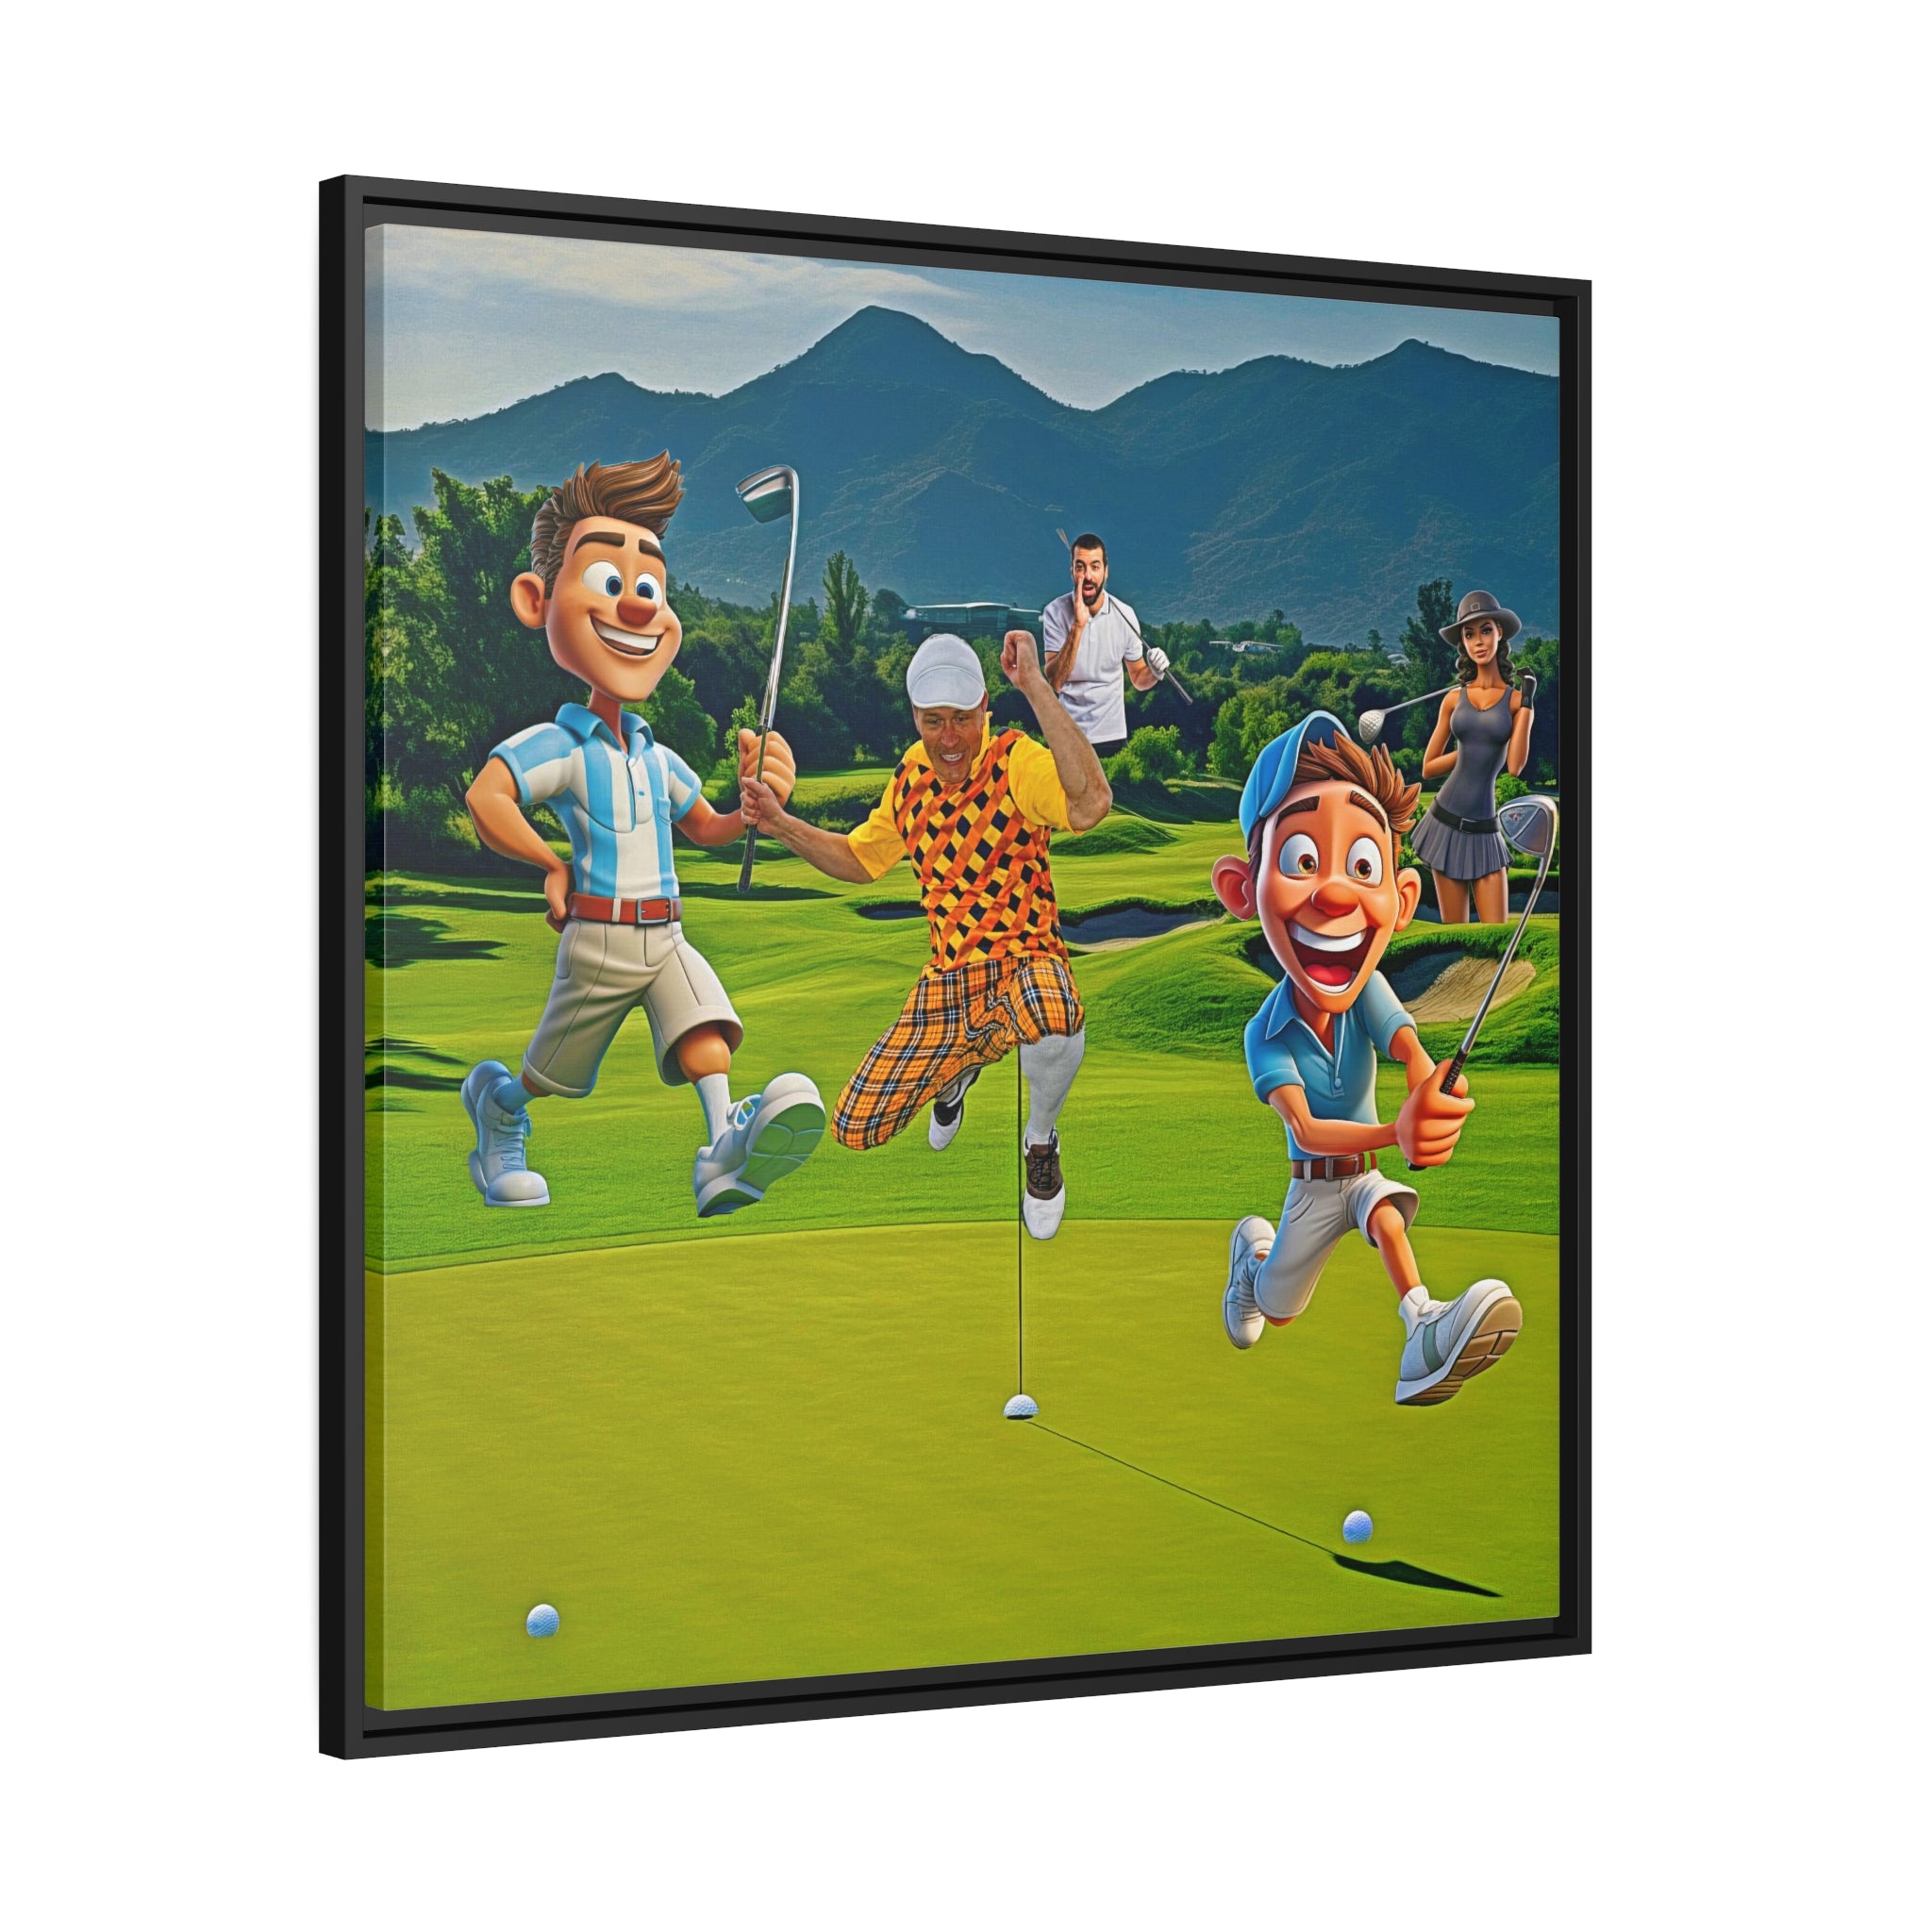 Wall Art HOLE IN ONE Golf Canvas Print Art Painting Original Giclee + Frame Love Nice Beauty Fun Design Fit Sport Hot House Office Gift Ready Hang